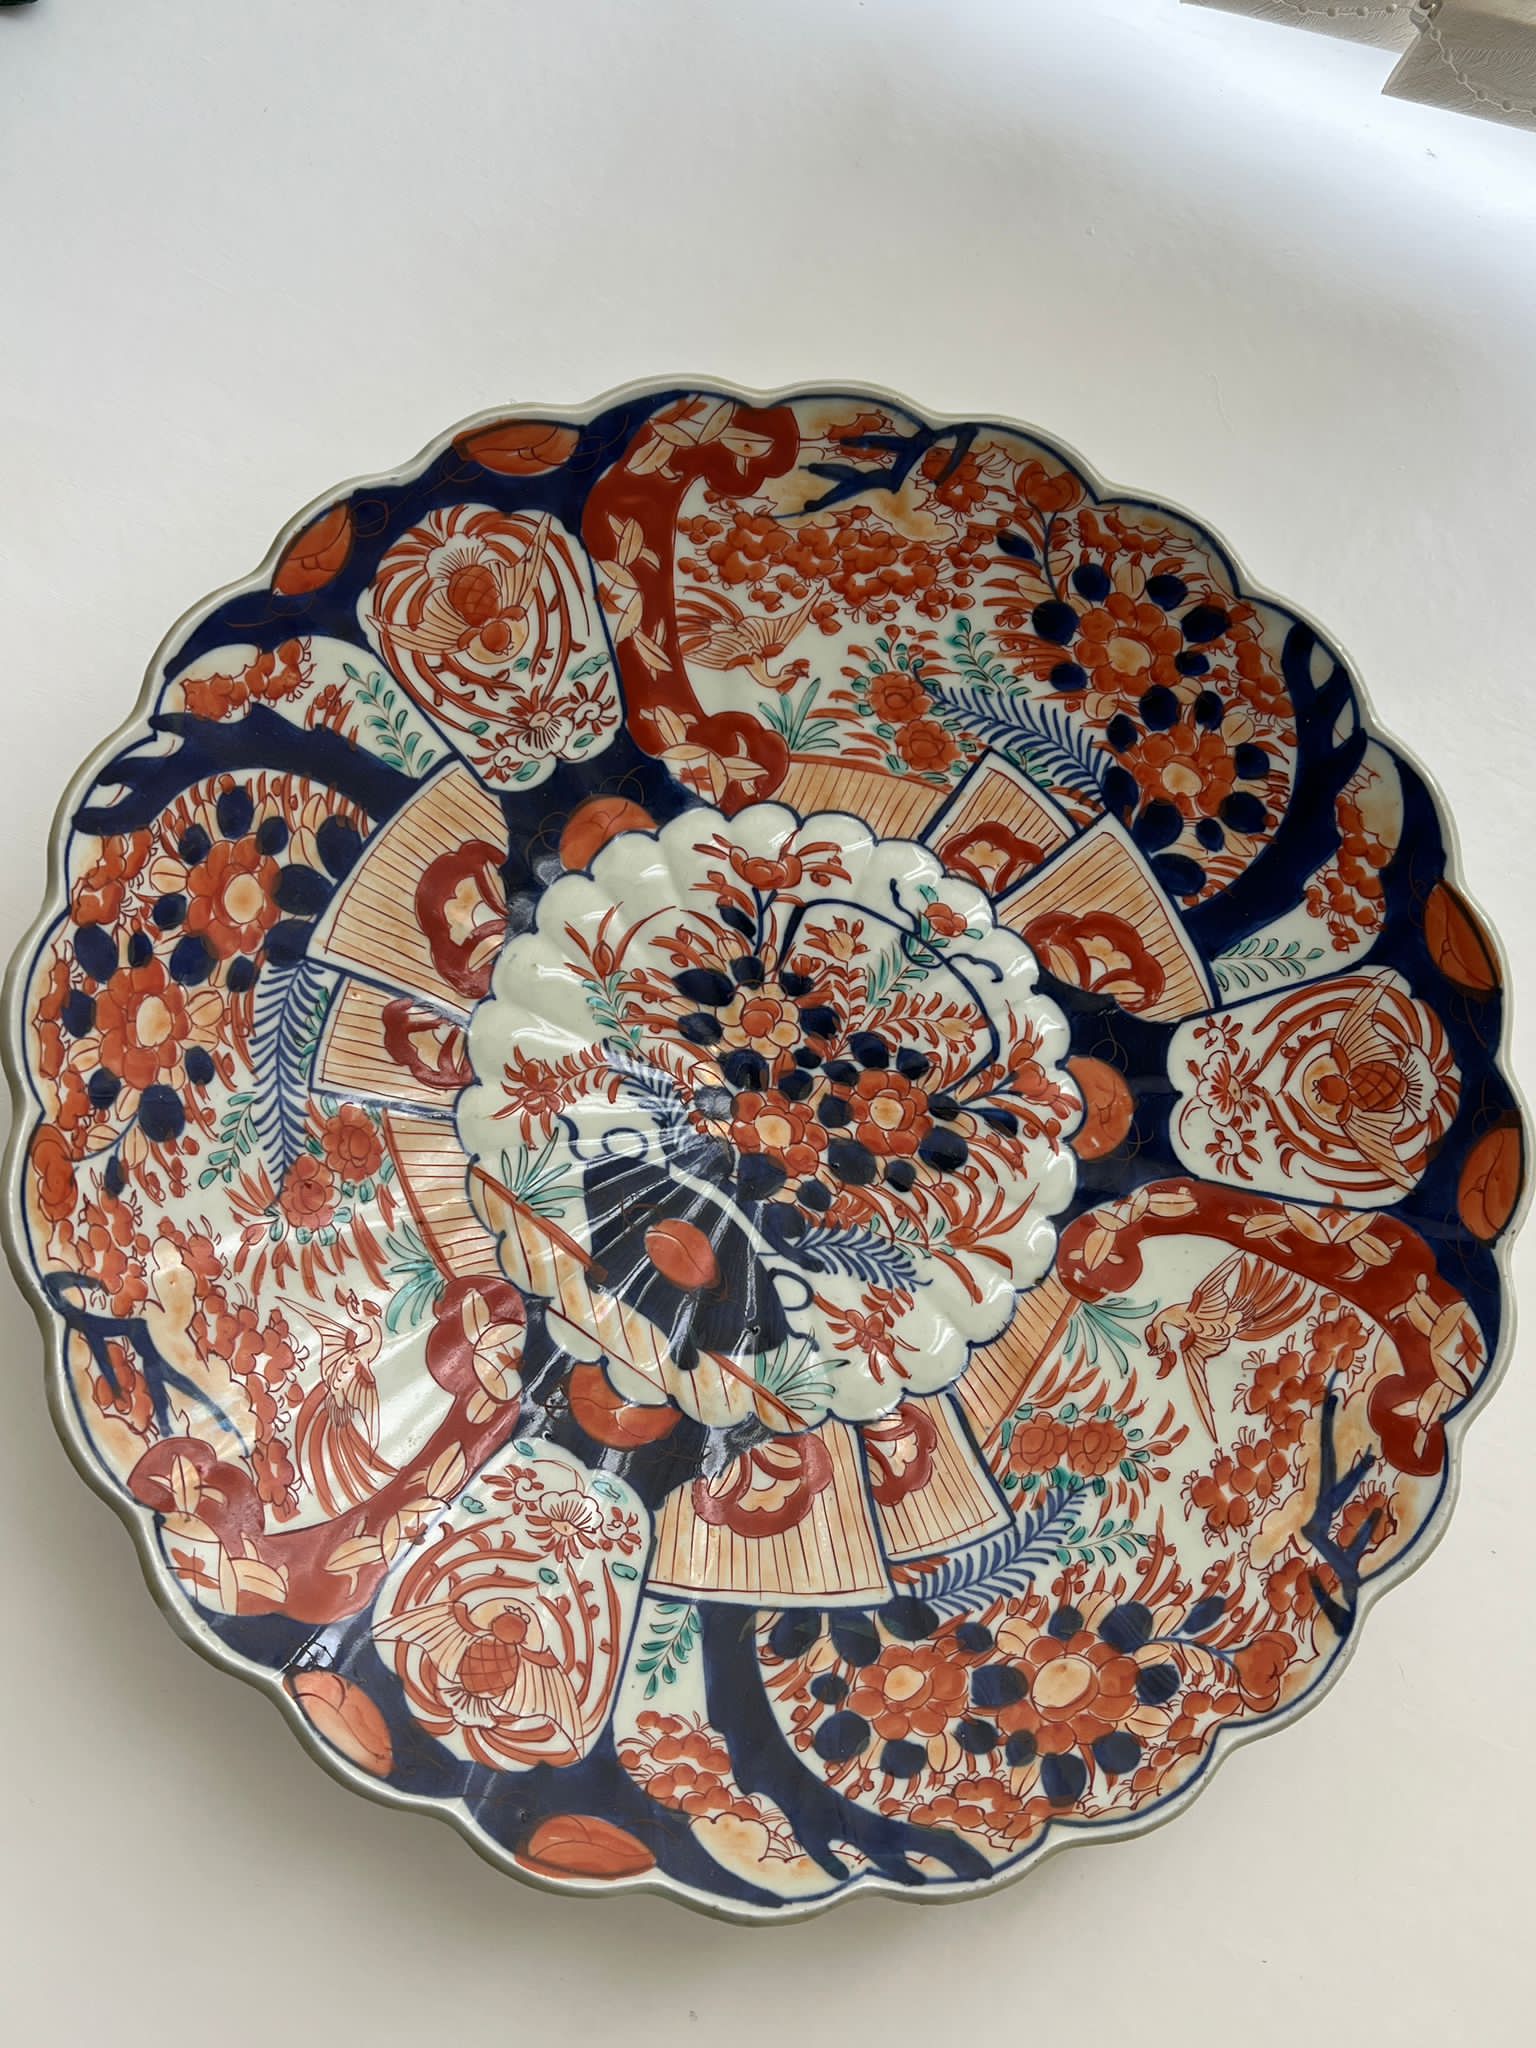 19th Century Imari charger with scalloped edge - Image 3 of 5